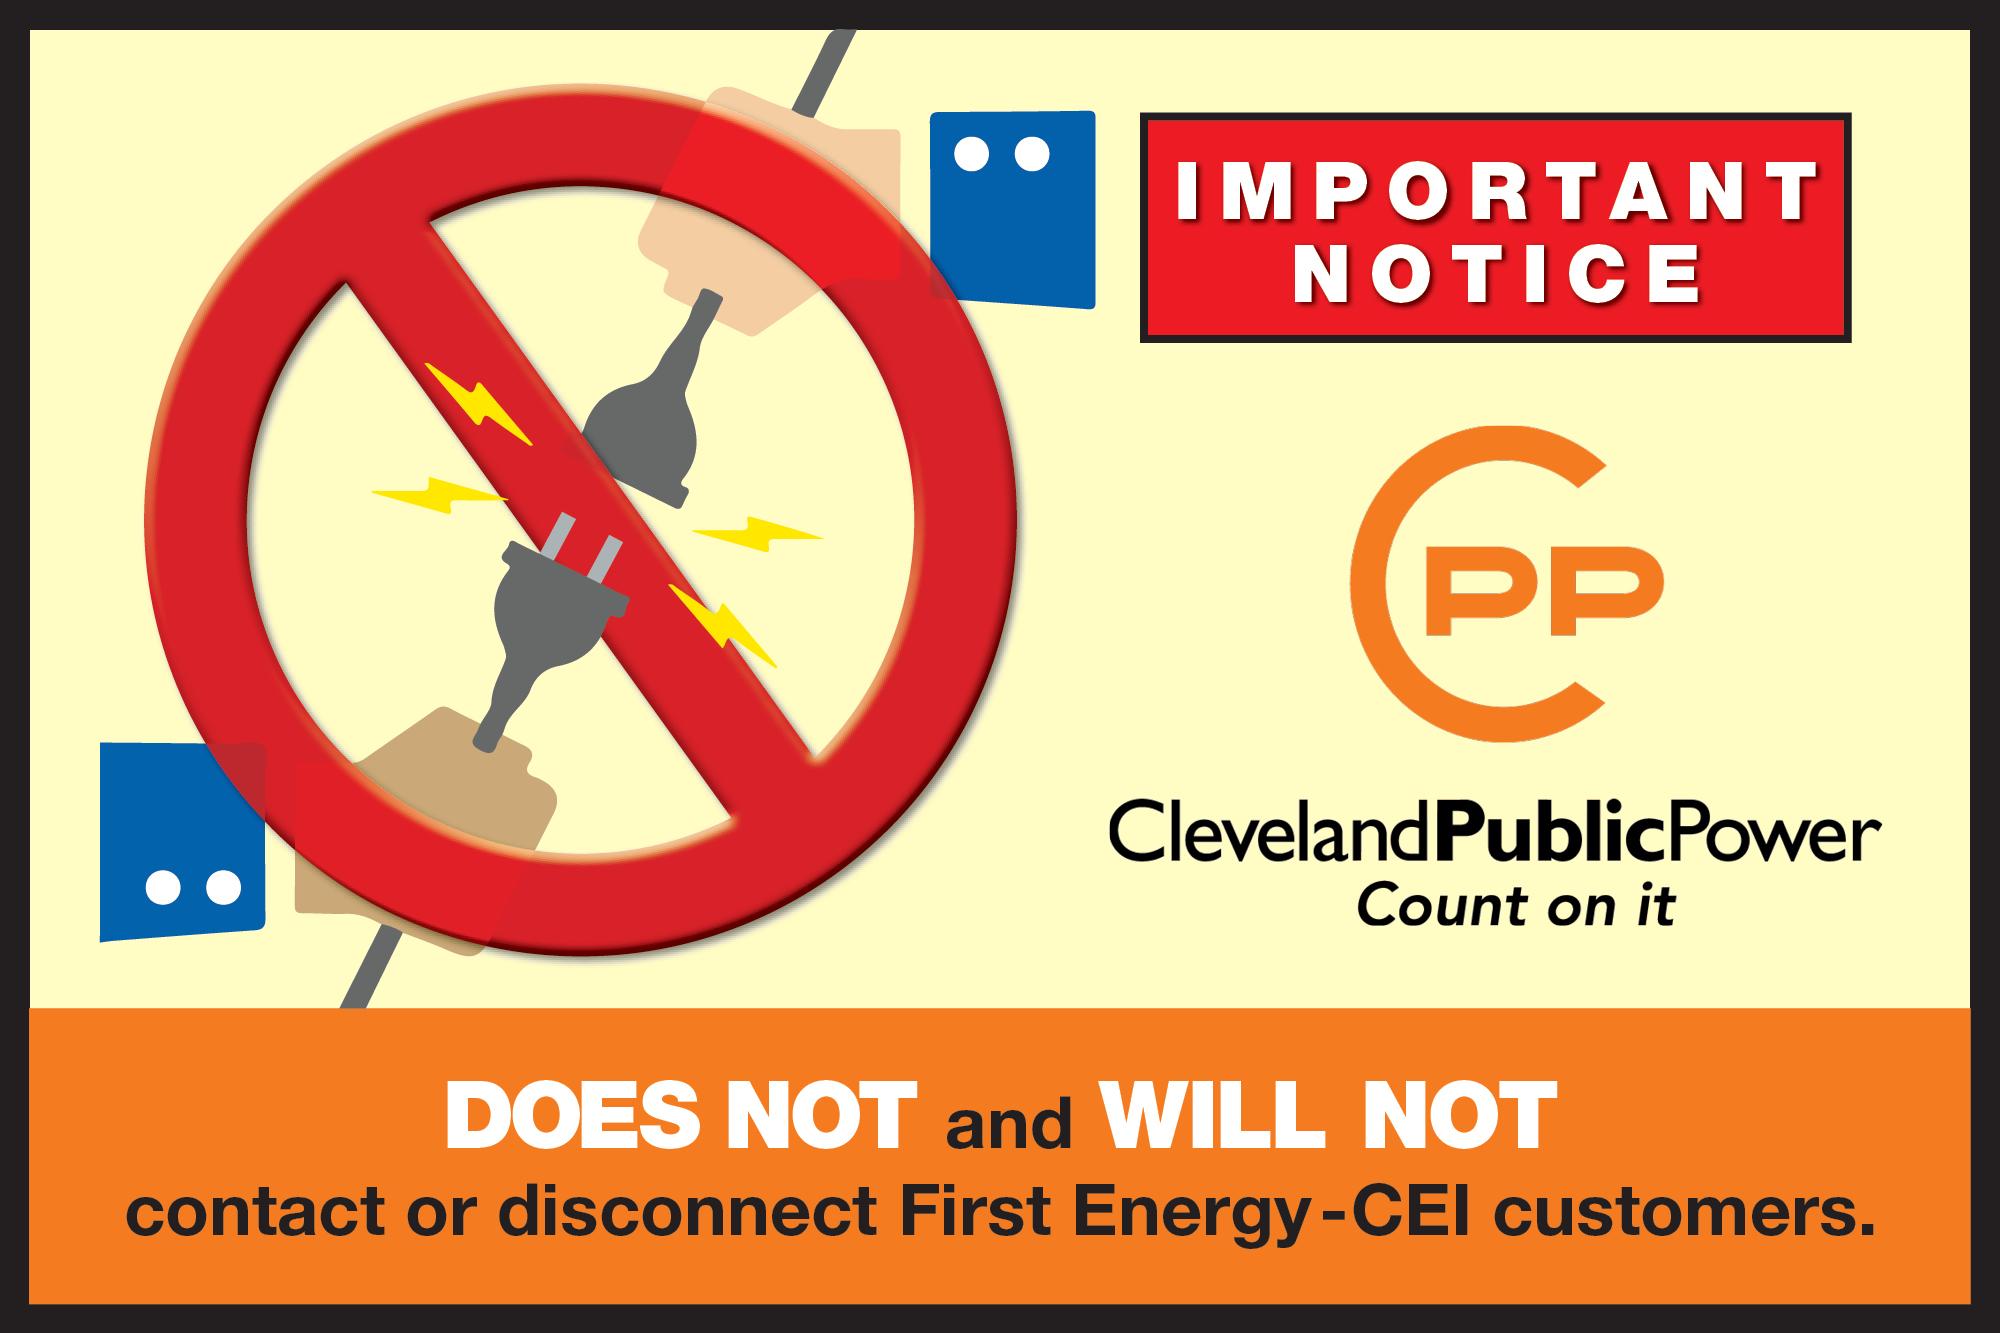 Image explaining CPP will not contact First Energy customers